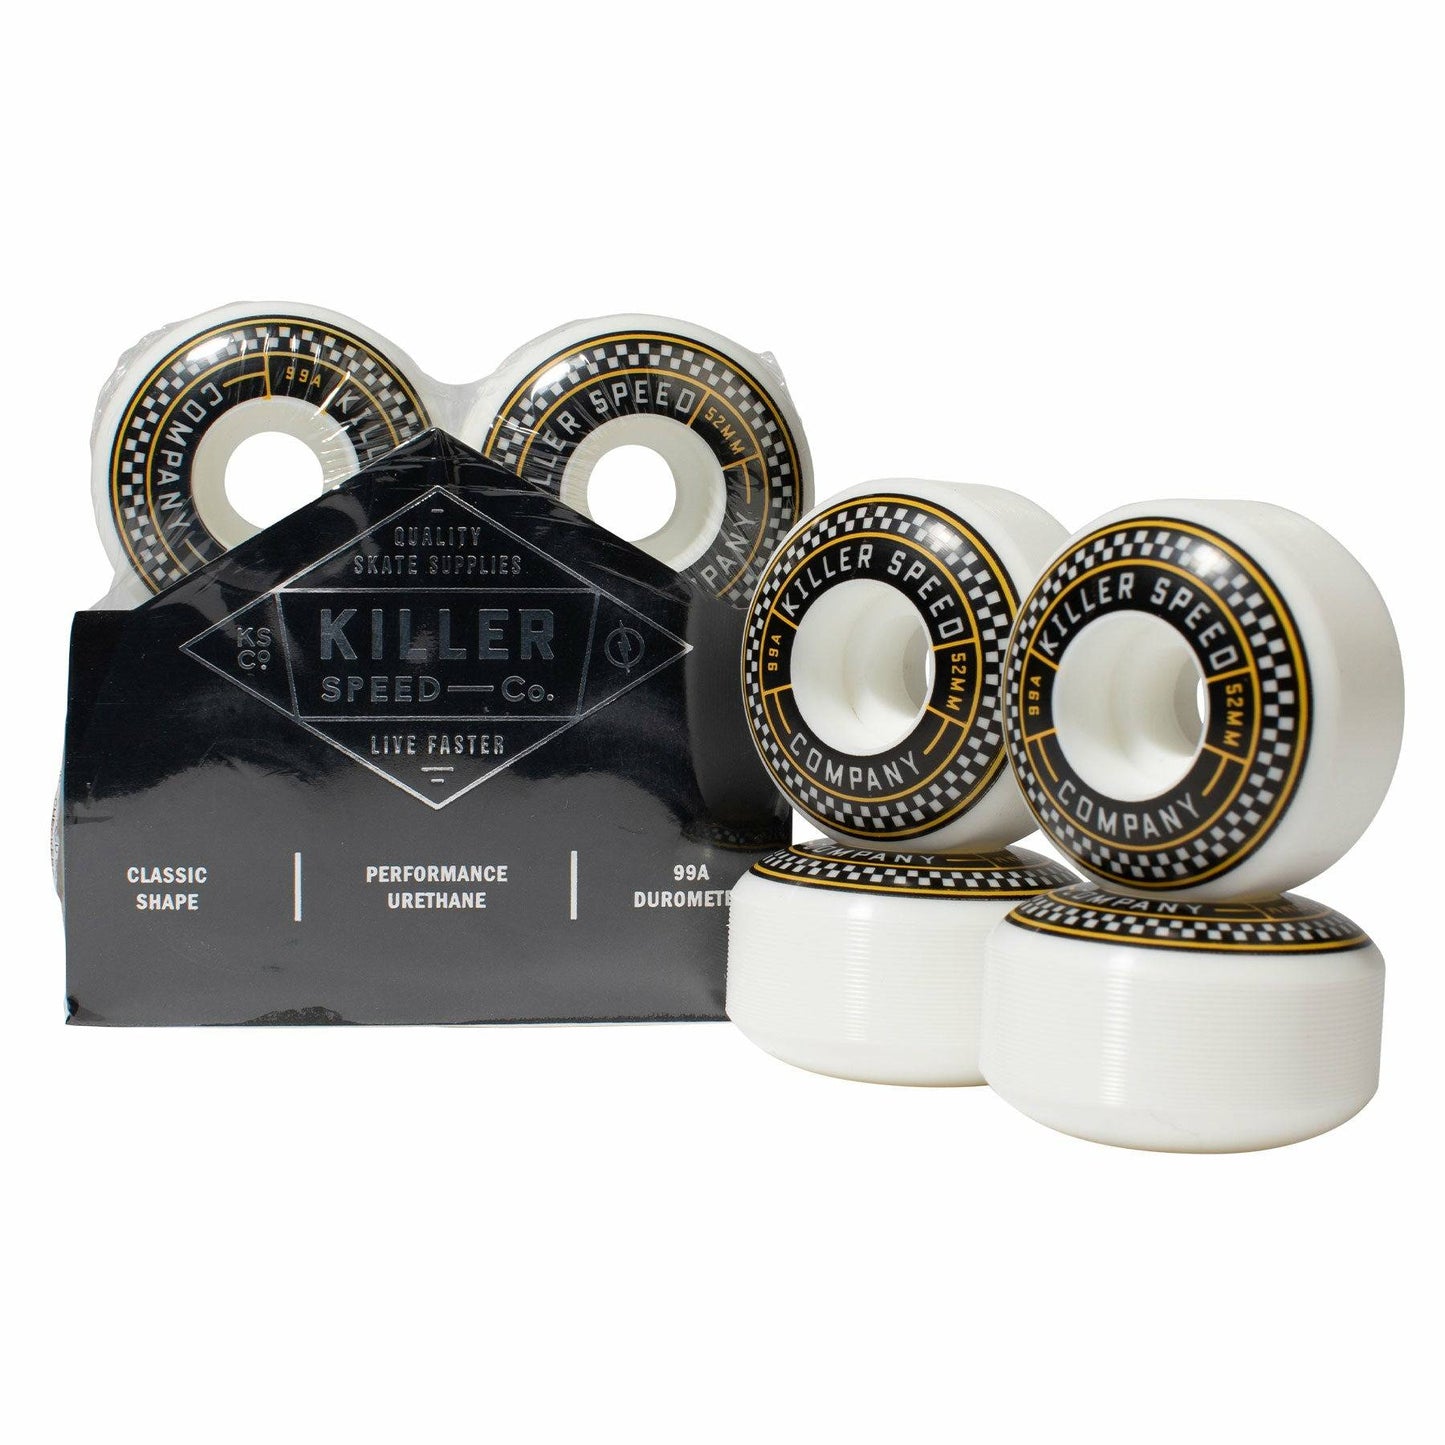 Team Classic - Checkers 52mm 99a